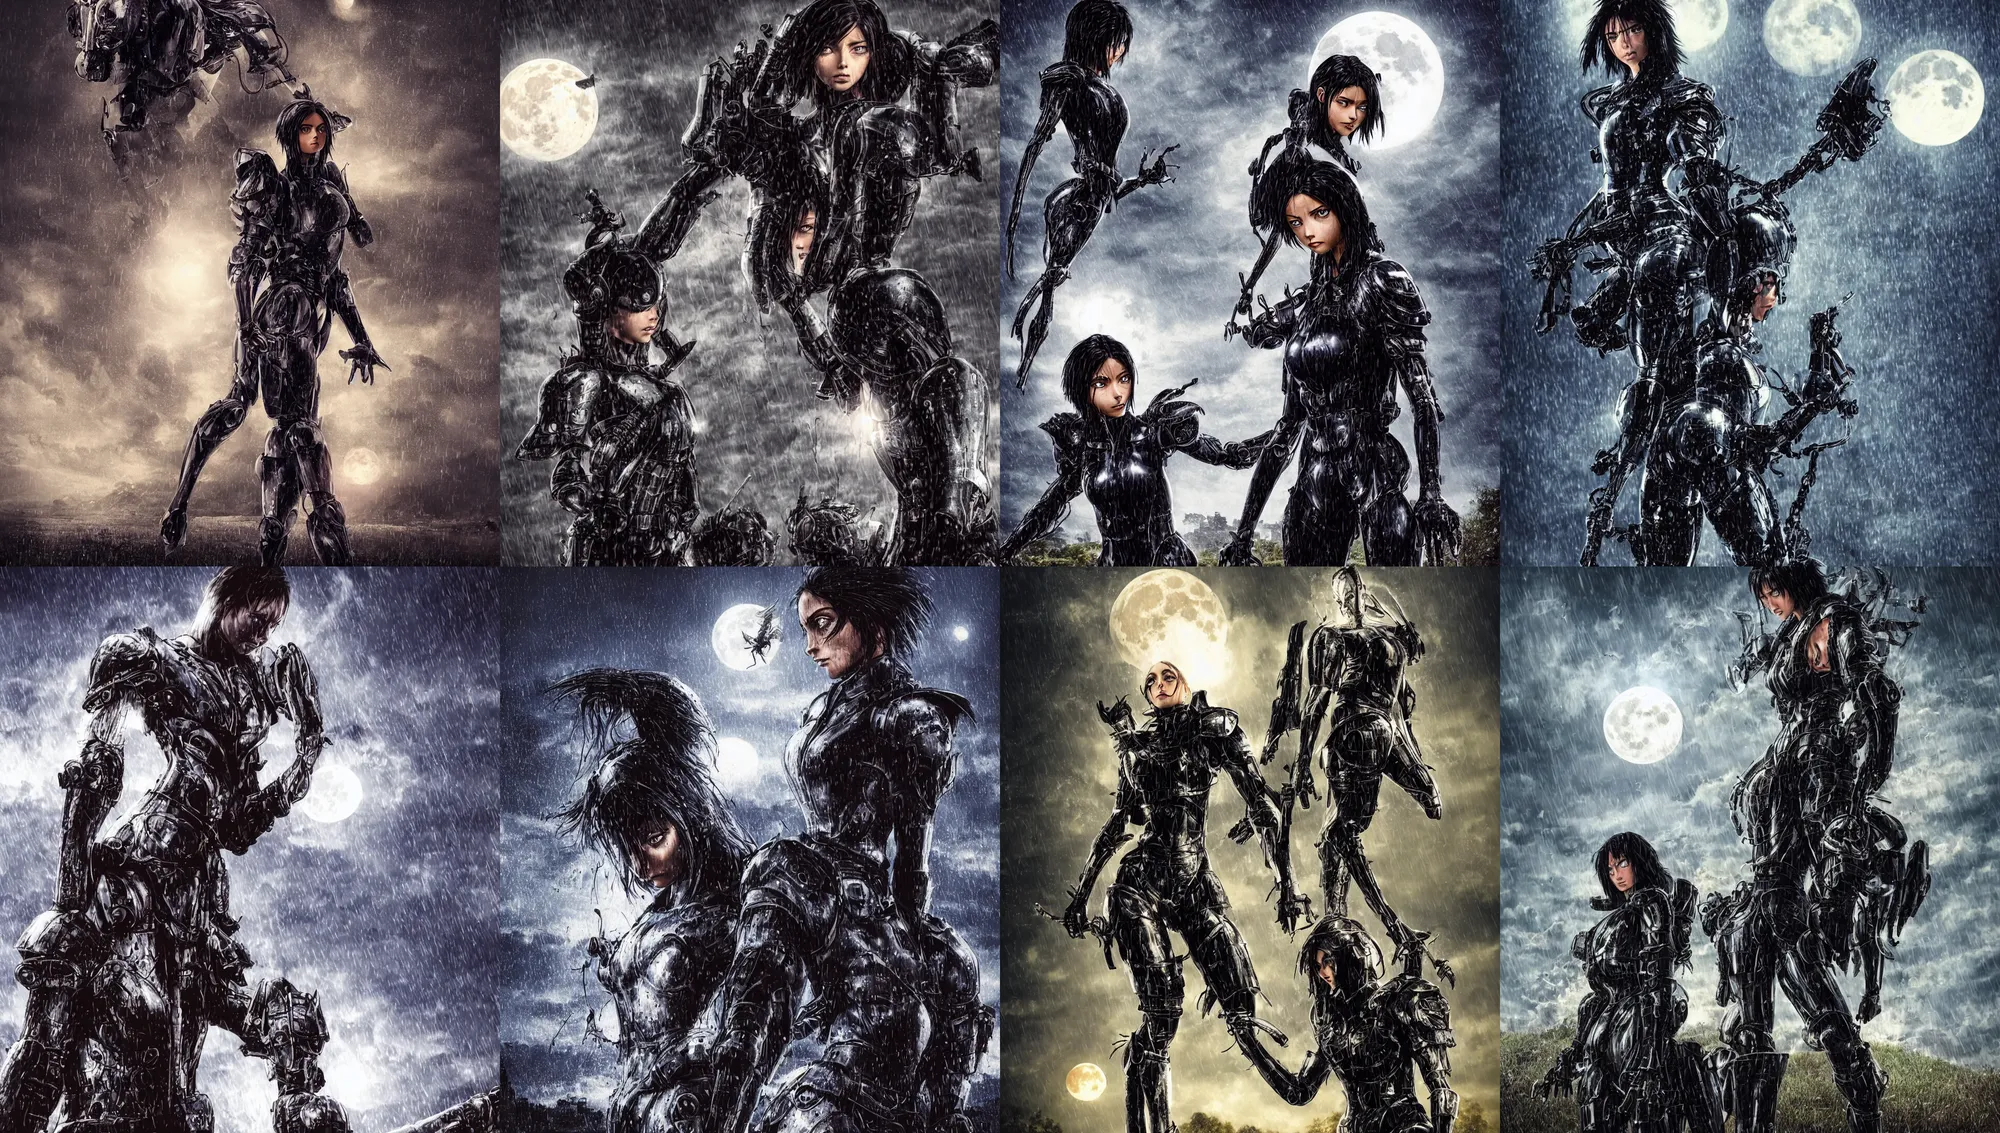 Prompt: angry christian, wearing rain soaked armour in heavy rain, incredibly fine detailed portrait, battle angel alita, dynamic angle, elegant, full body profile, 2 0 0 mm focal length, highly detailed, dramatic full moon lighting, many fireflies, gothic castle prodominently in the background, movie cover